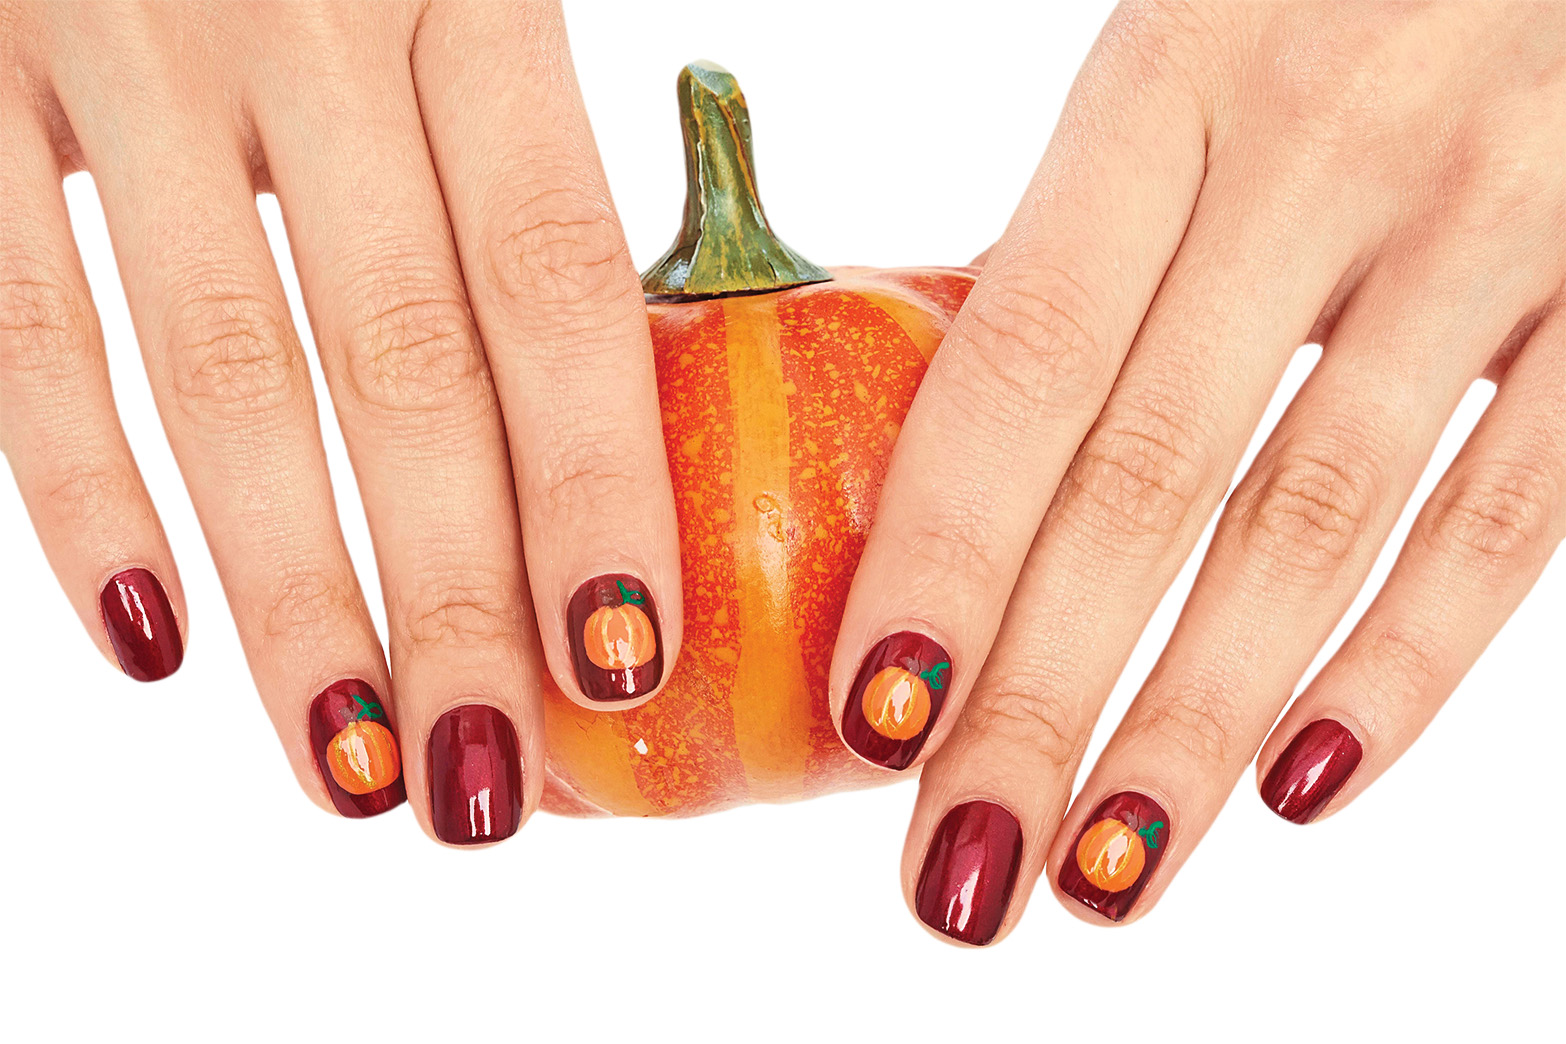 Hands holding a miniature pumpkin with nails painted dark maroon and with pumpkin fall nail designs accents